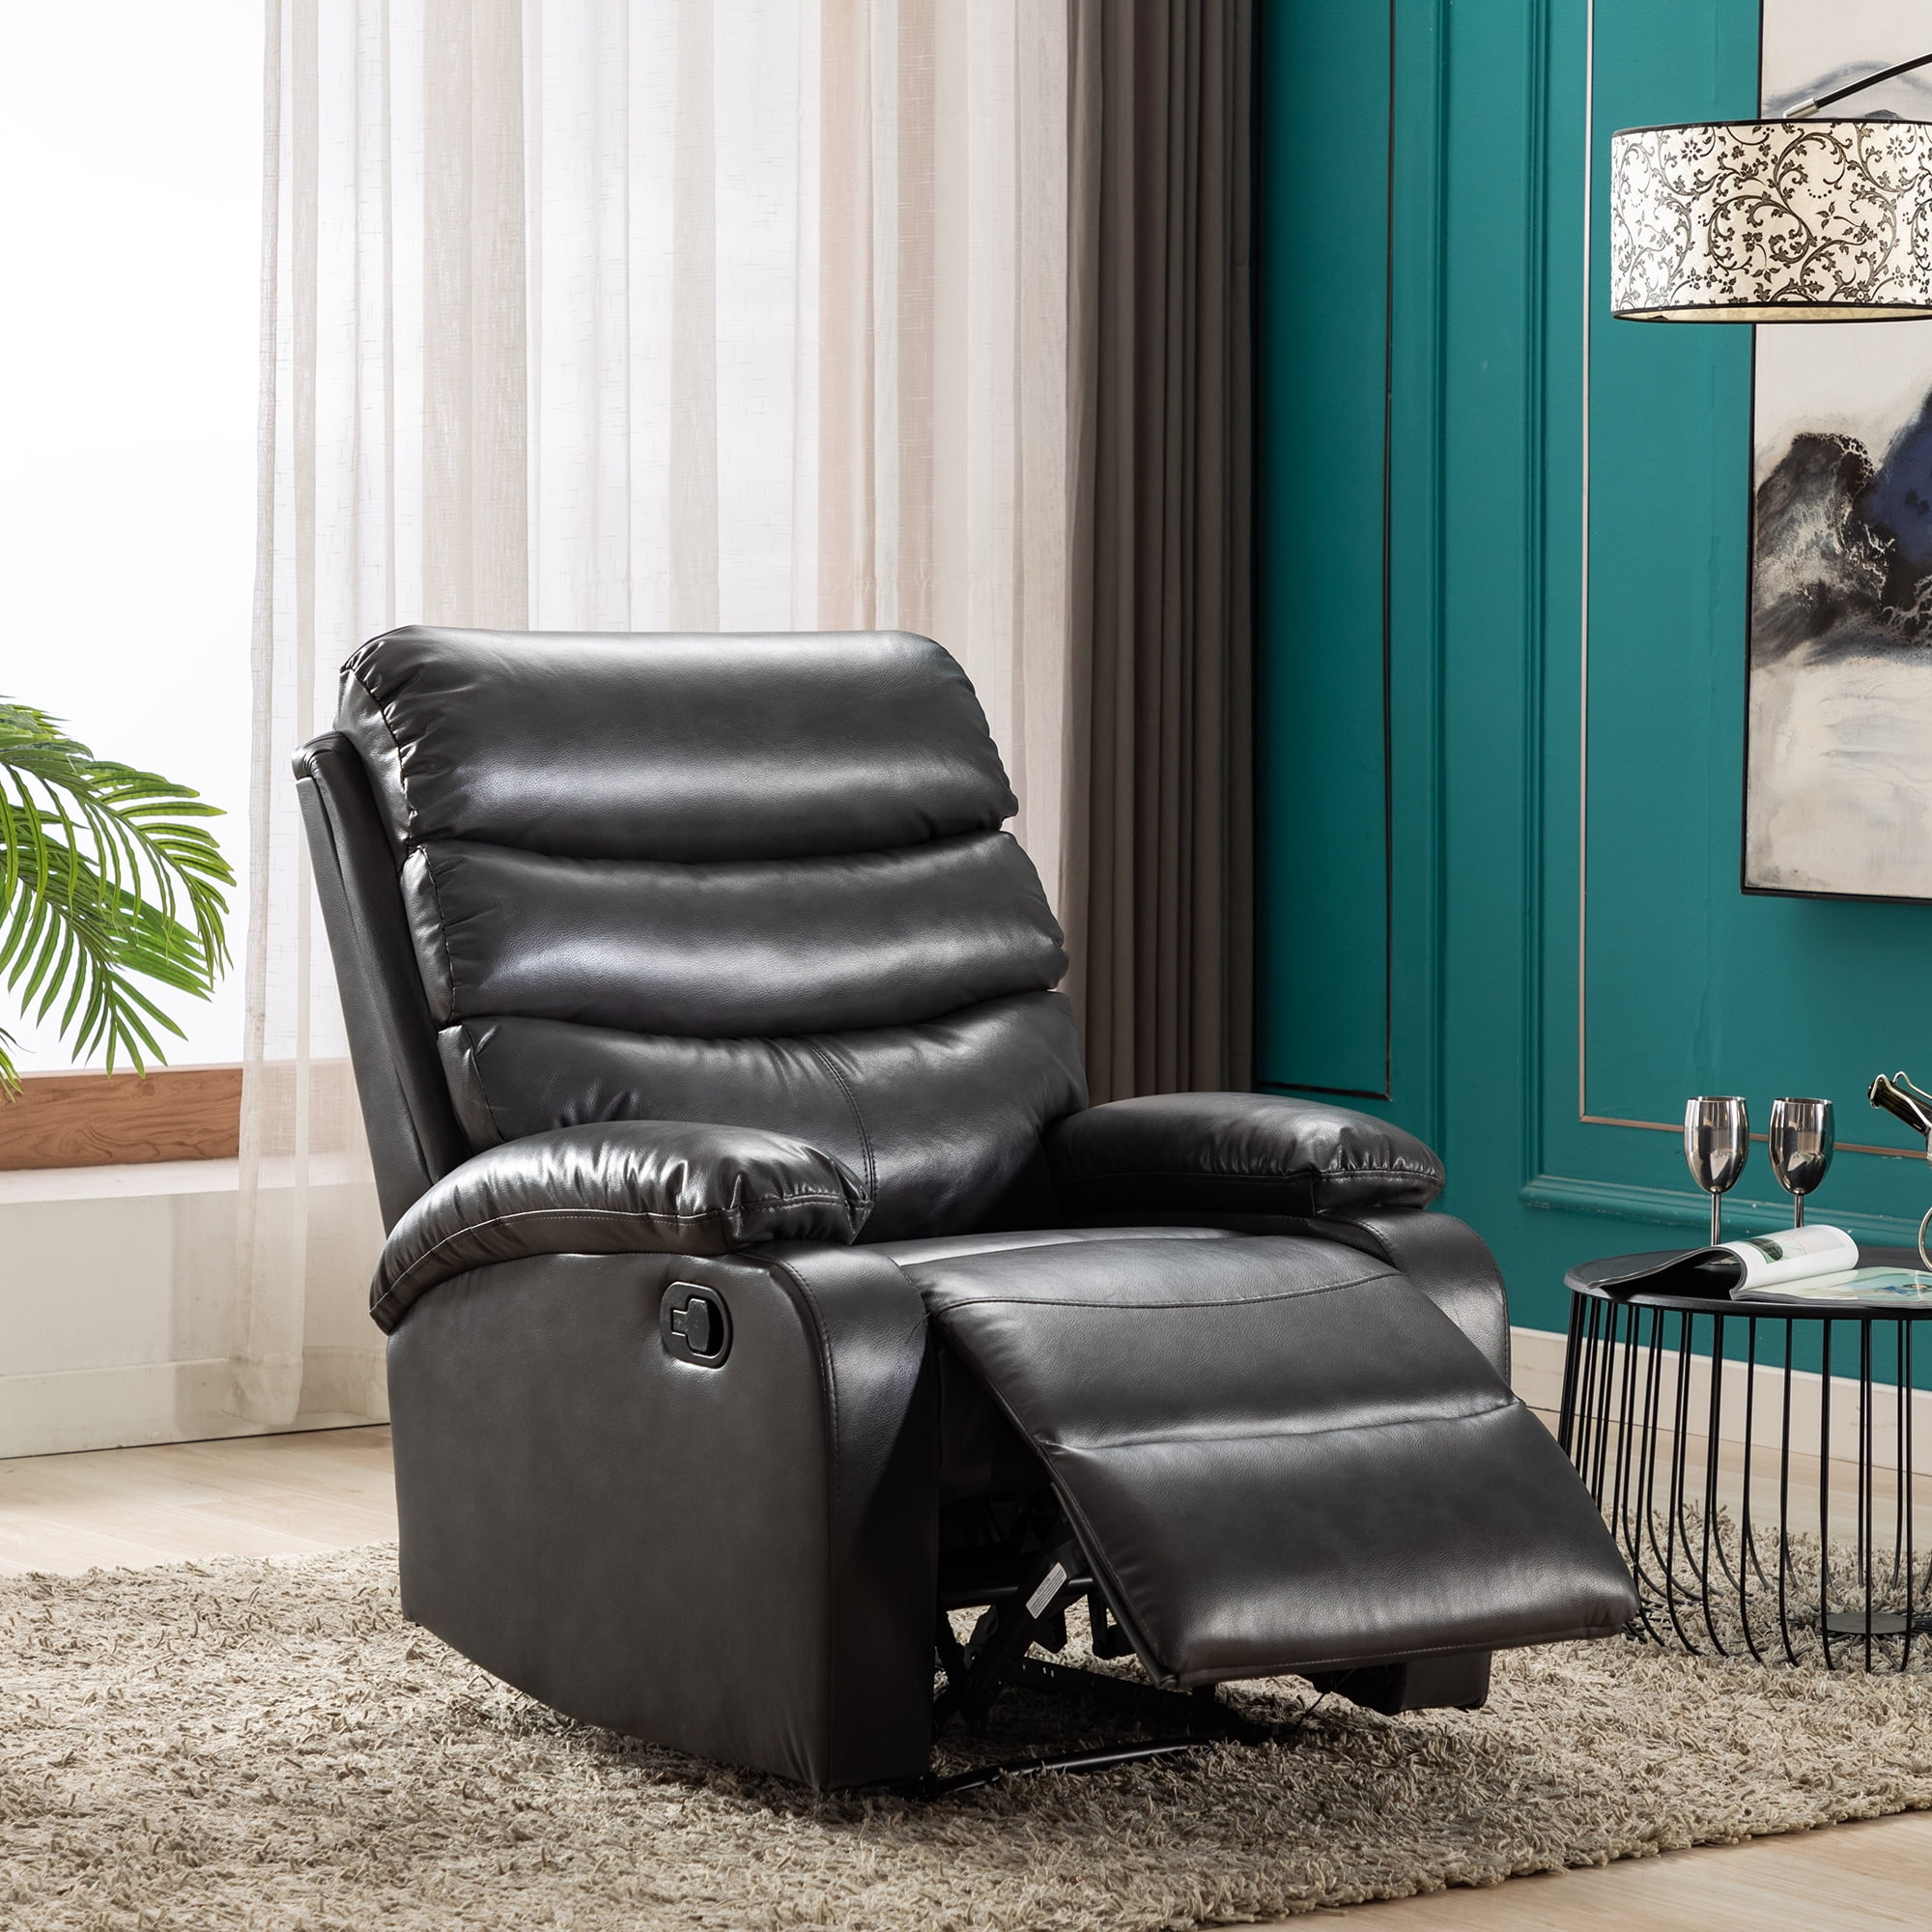 recliner chair,air leather recliner,rocking recliner singapore | ubuy